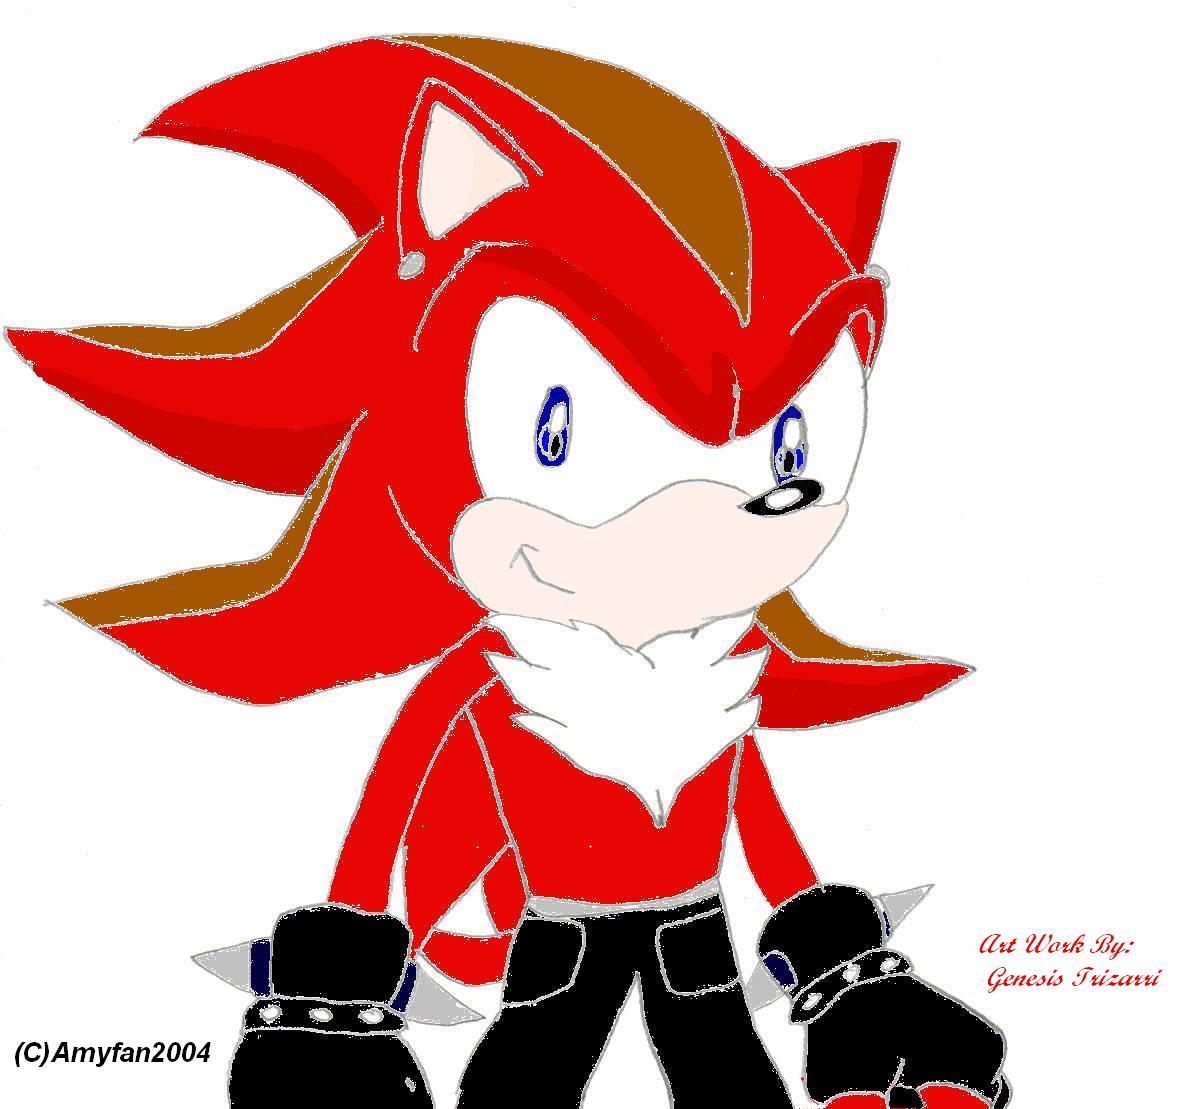 Request From Revenge The Hedgehog by Amyfan2004